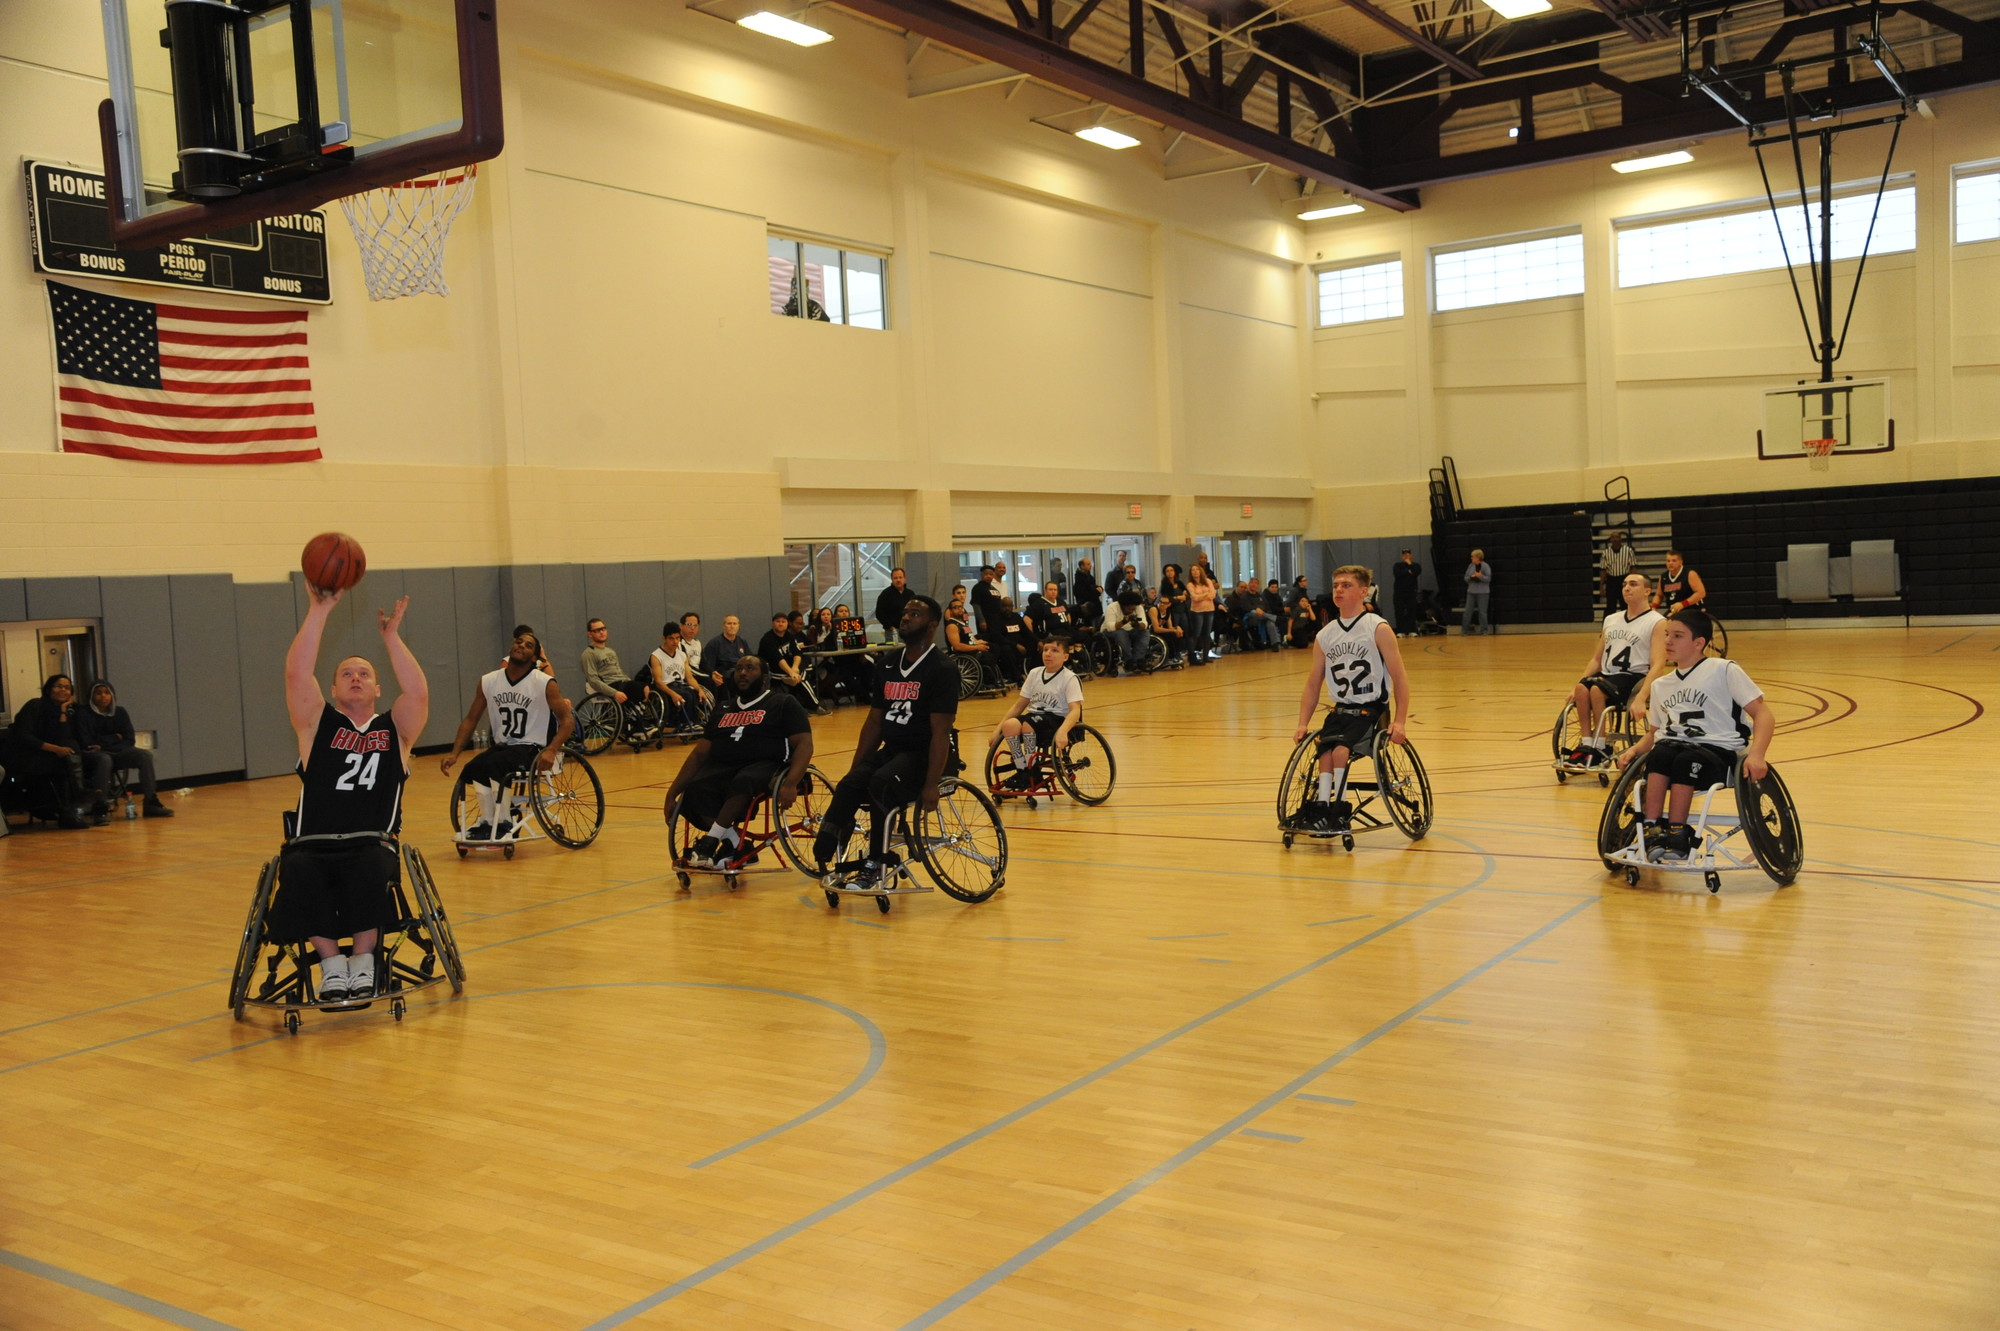 The “Yes We Can” Community Center in Westbury housed a tournament over the weekend of Jan. 16.